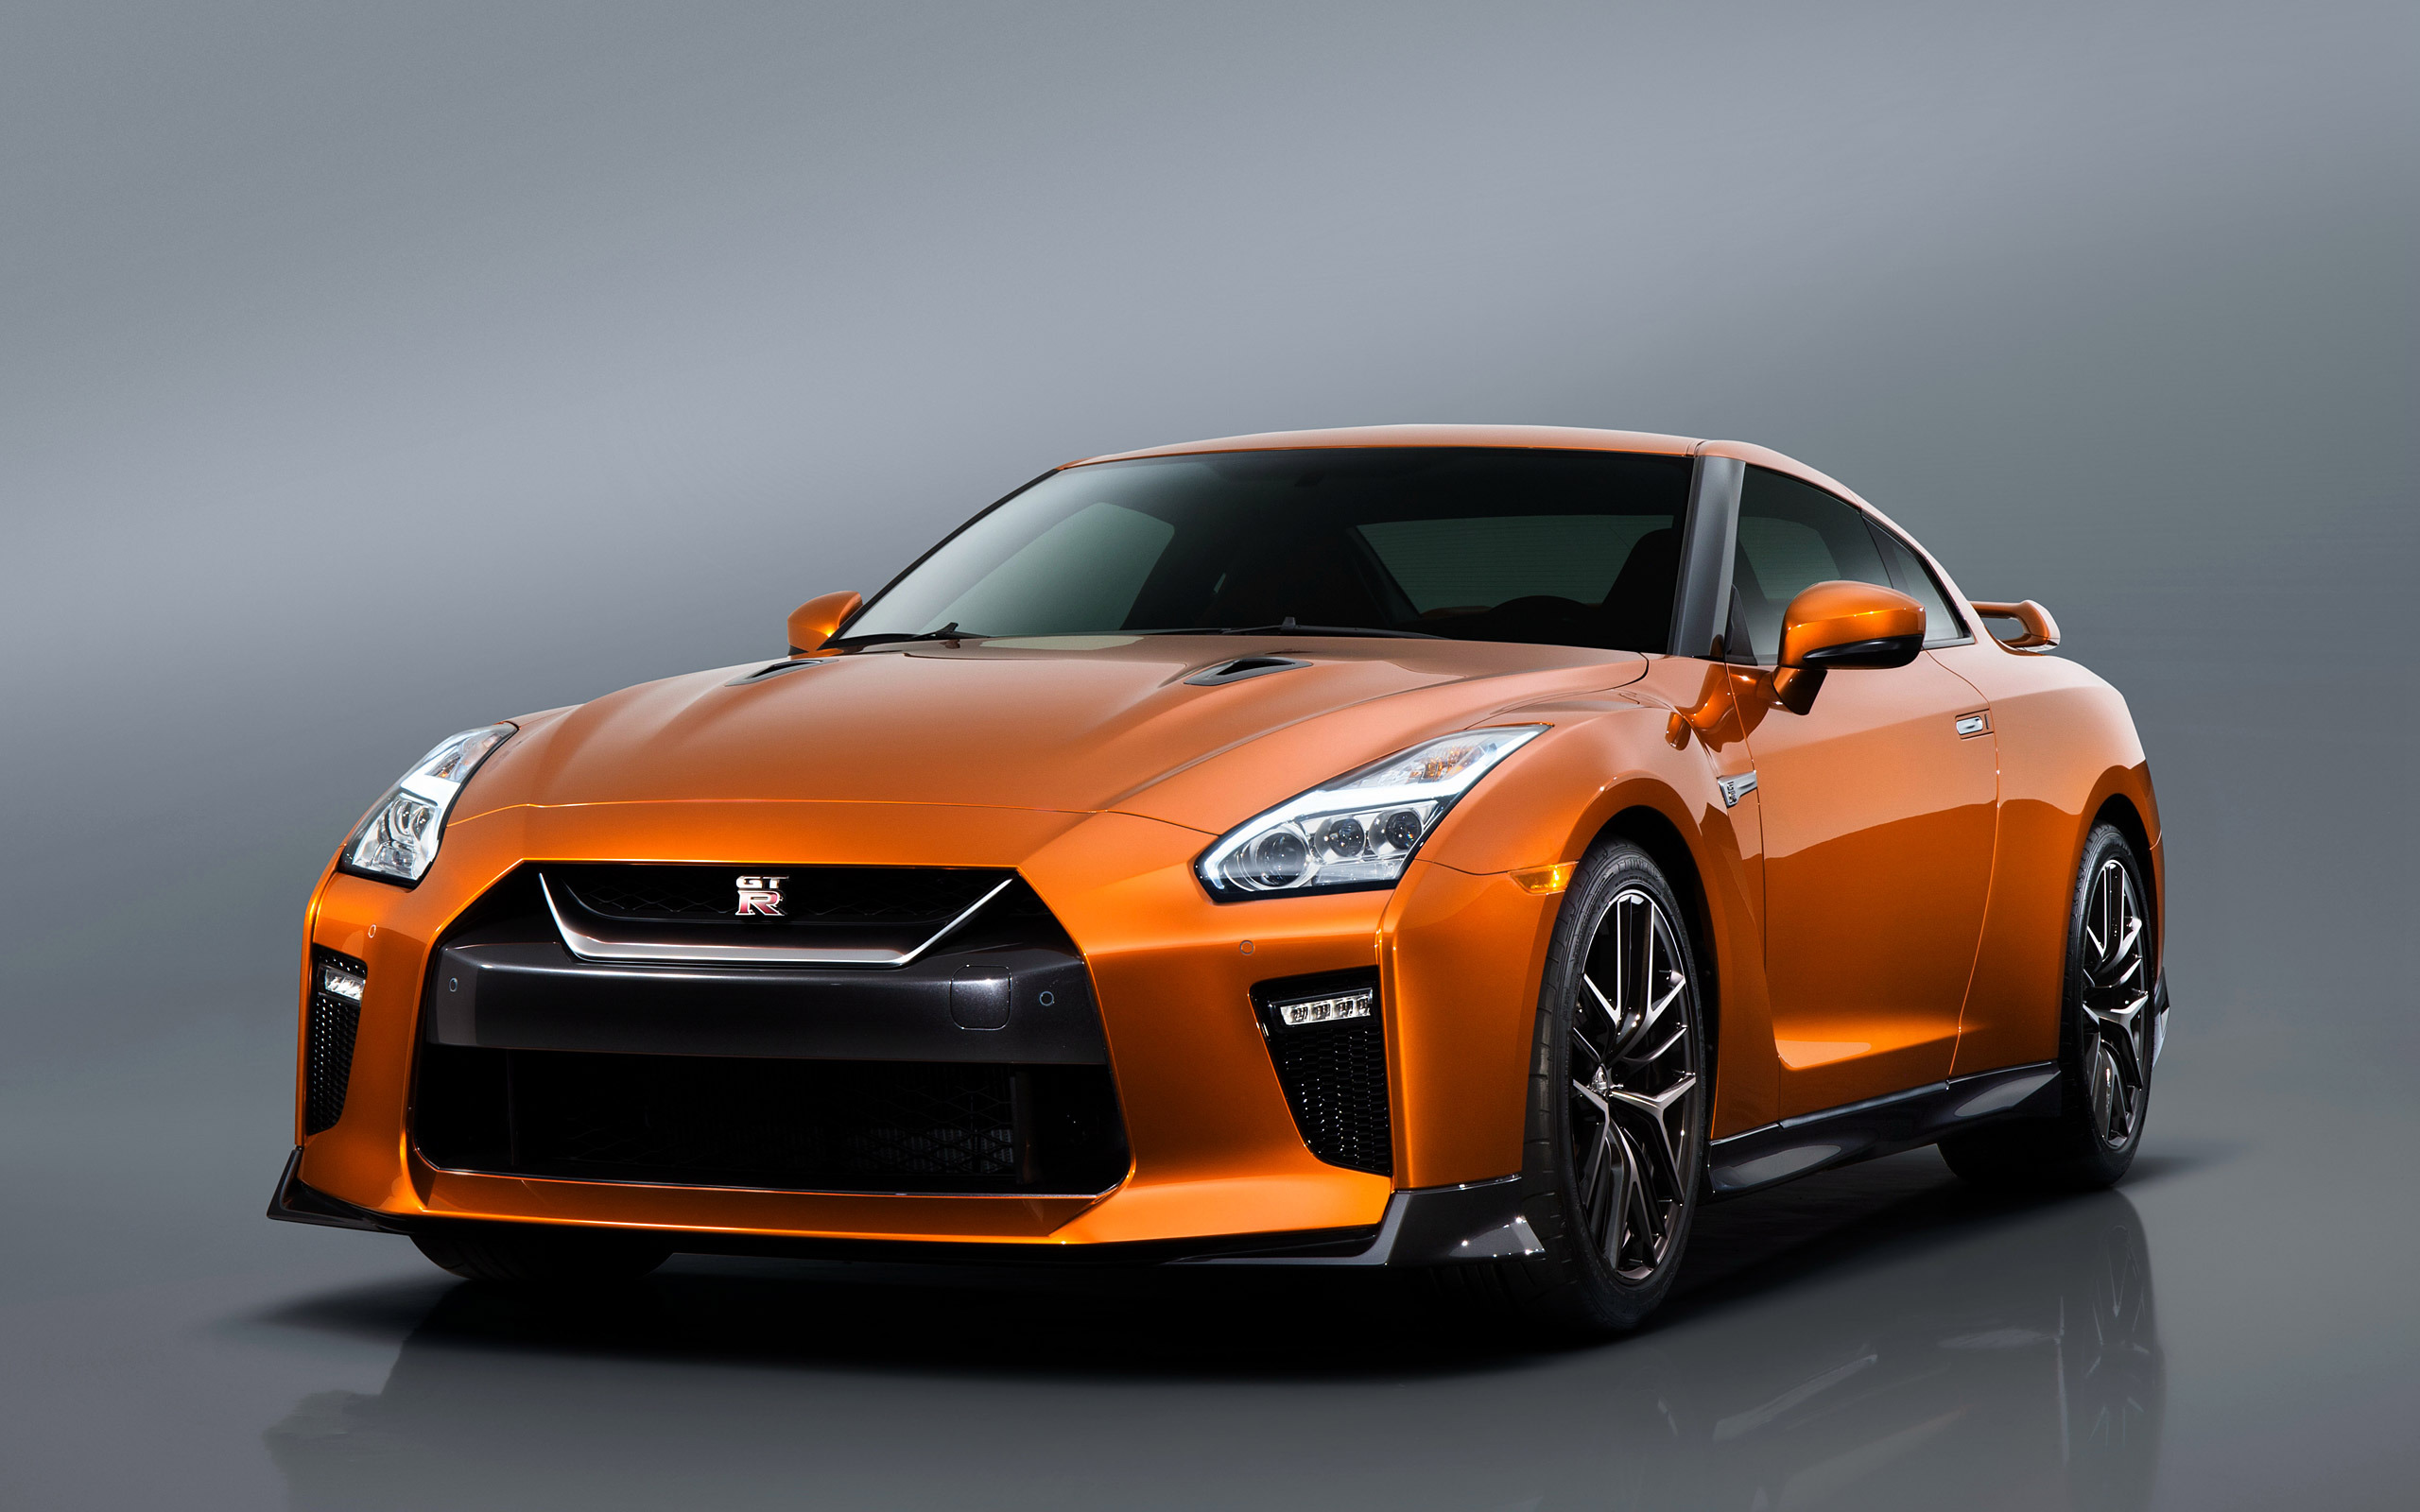 Nissan GT R R35, Nissan GTR, Car, Vehicle, Simple Background, Reflection, Orange Cars Wallpapers ...